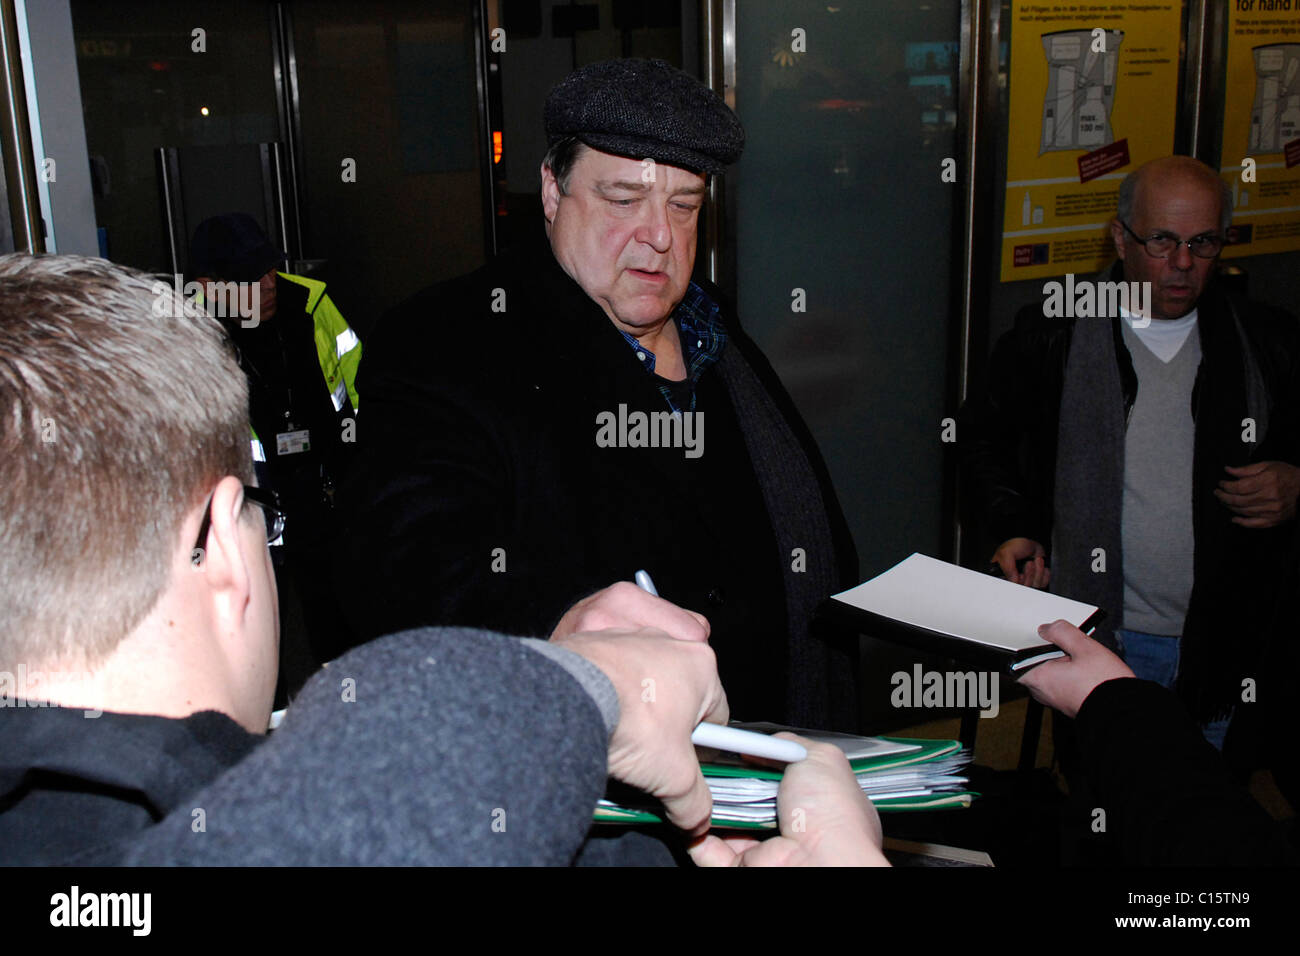 John Goodman flying into Tegel Airport from New York at 8am for the Berlin Film Festival (Berlinale) Berlin, Germany - 07.02.09 Stock Photo